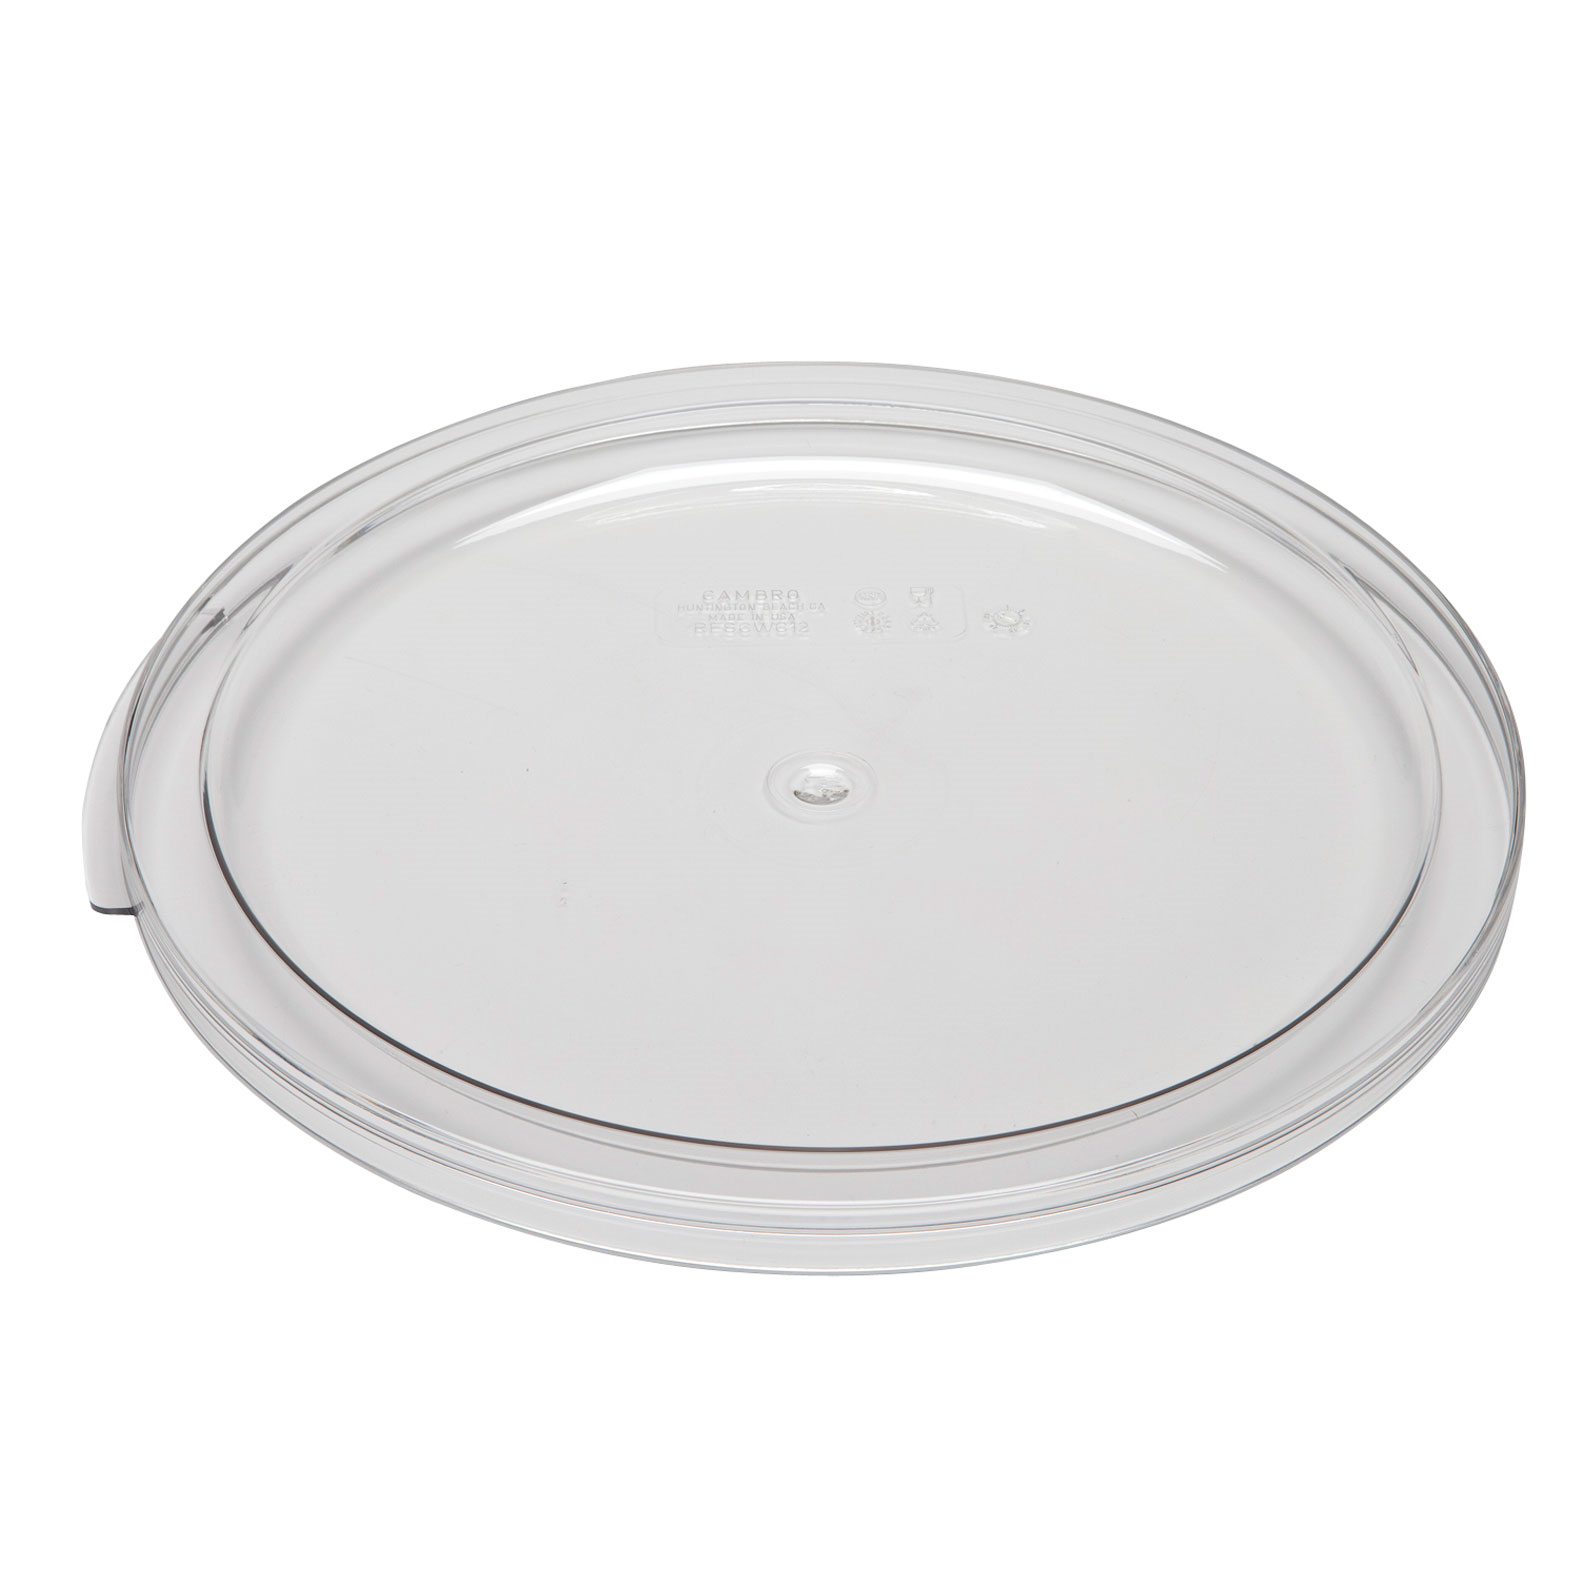 6 &amp; 8qt. CLEAR LID FOR ROUND
FOOD STORAGE CONTAINER, EACH